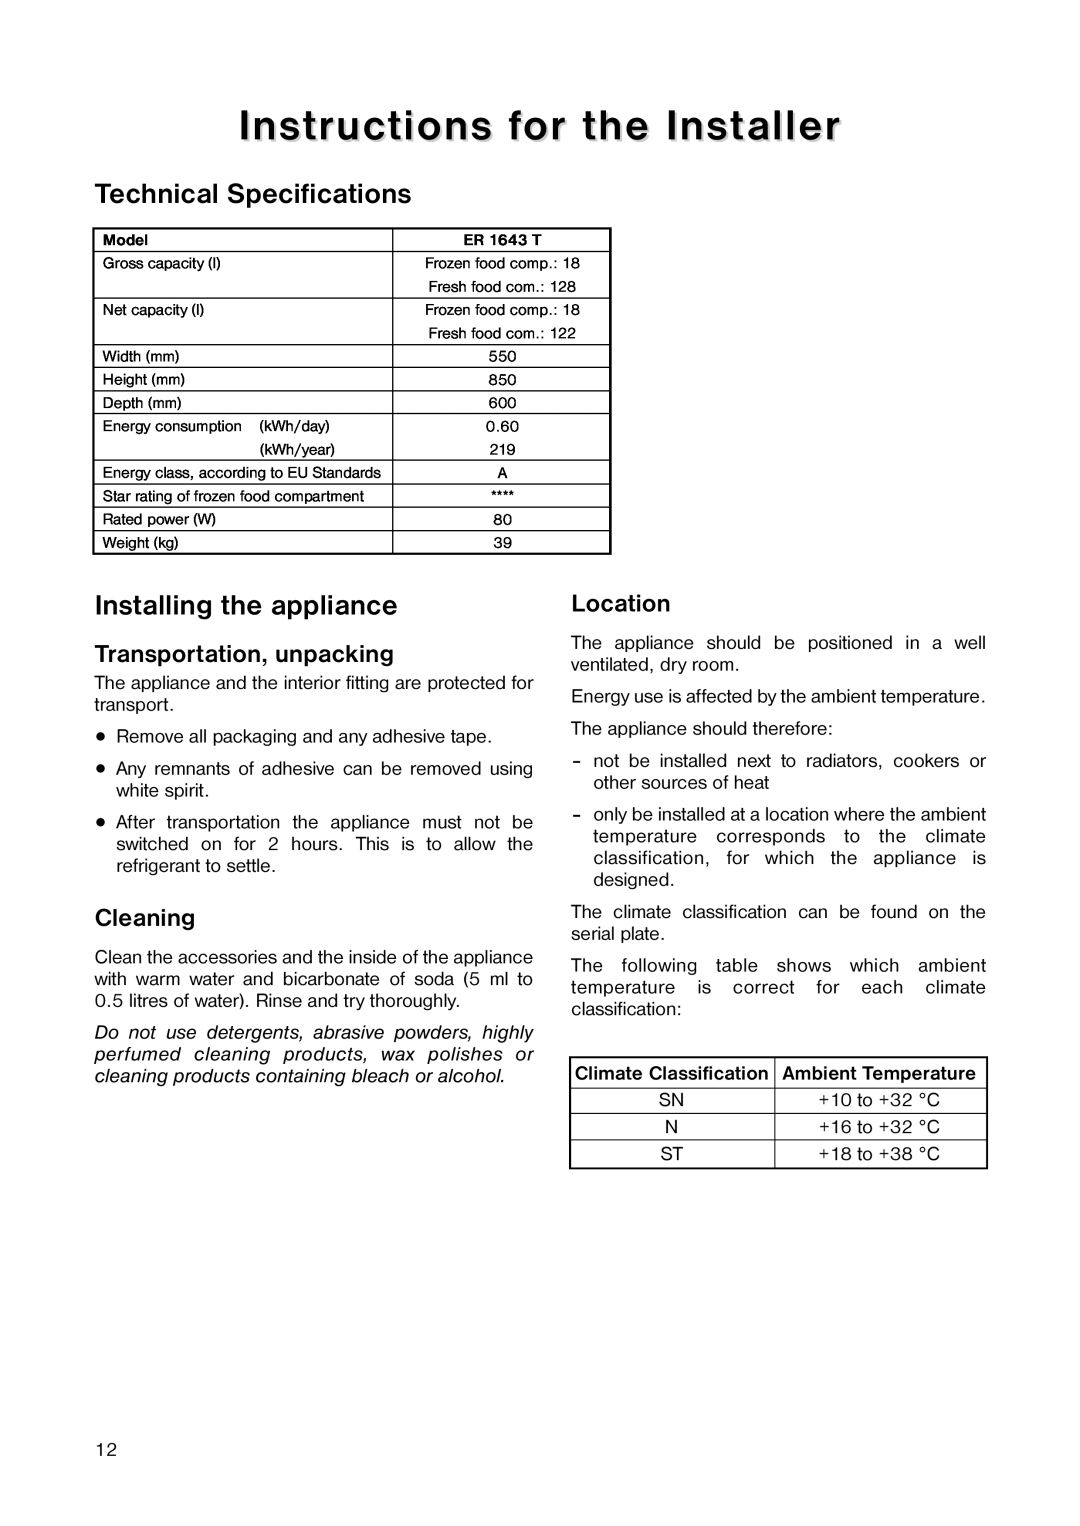 Electrolux ER 1643 T manual Instructions for the Installer, Technical Specifications, Installing the appliance, Cleaning 